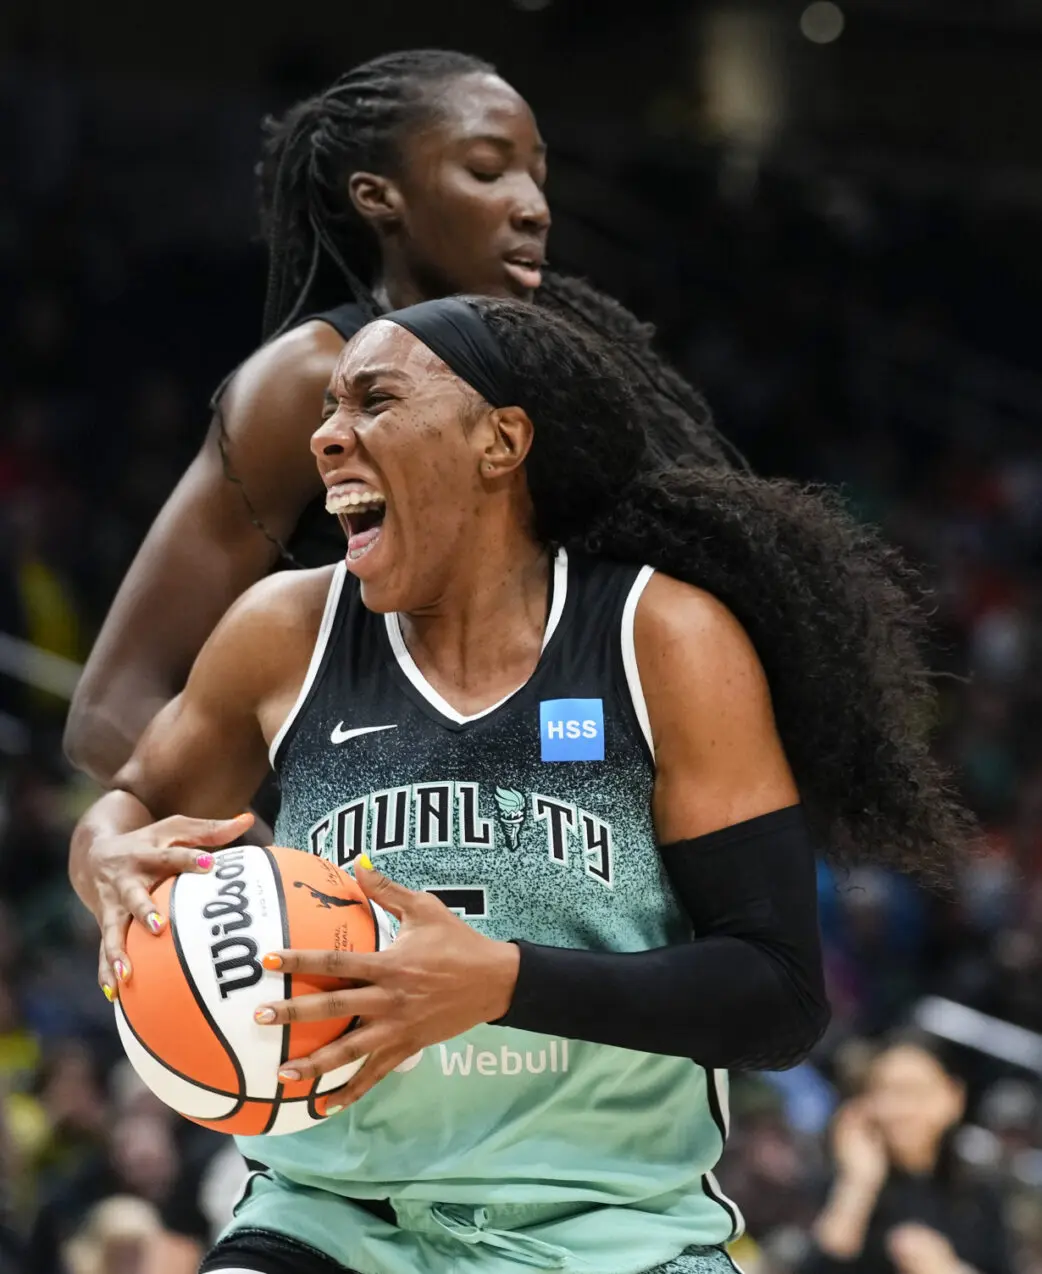 LA Post: Two WNBA players were among a dozen Americans who played in Russia after Brittney Griner's arrest